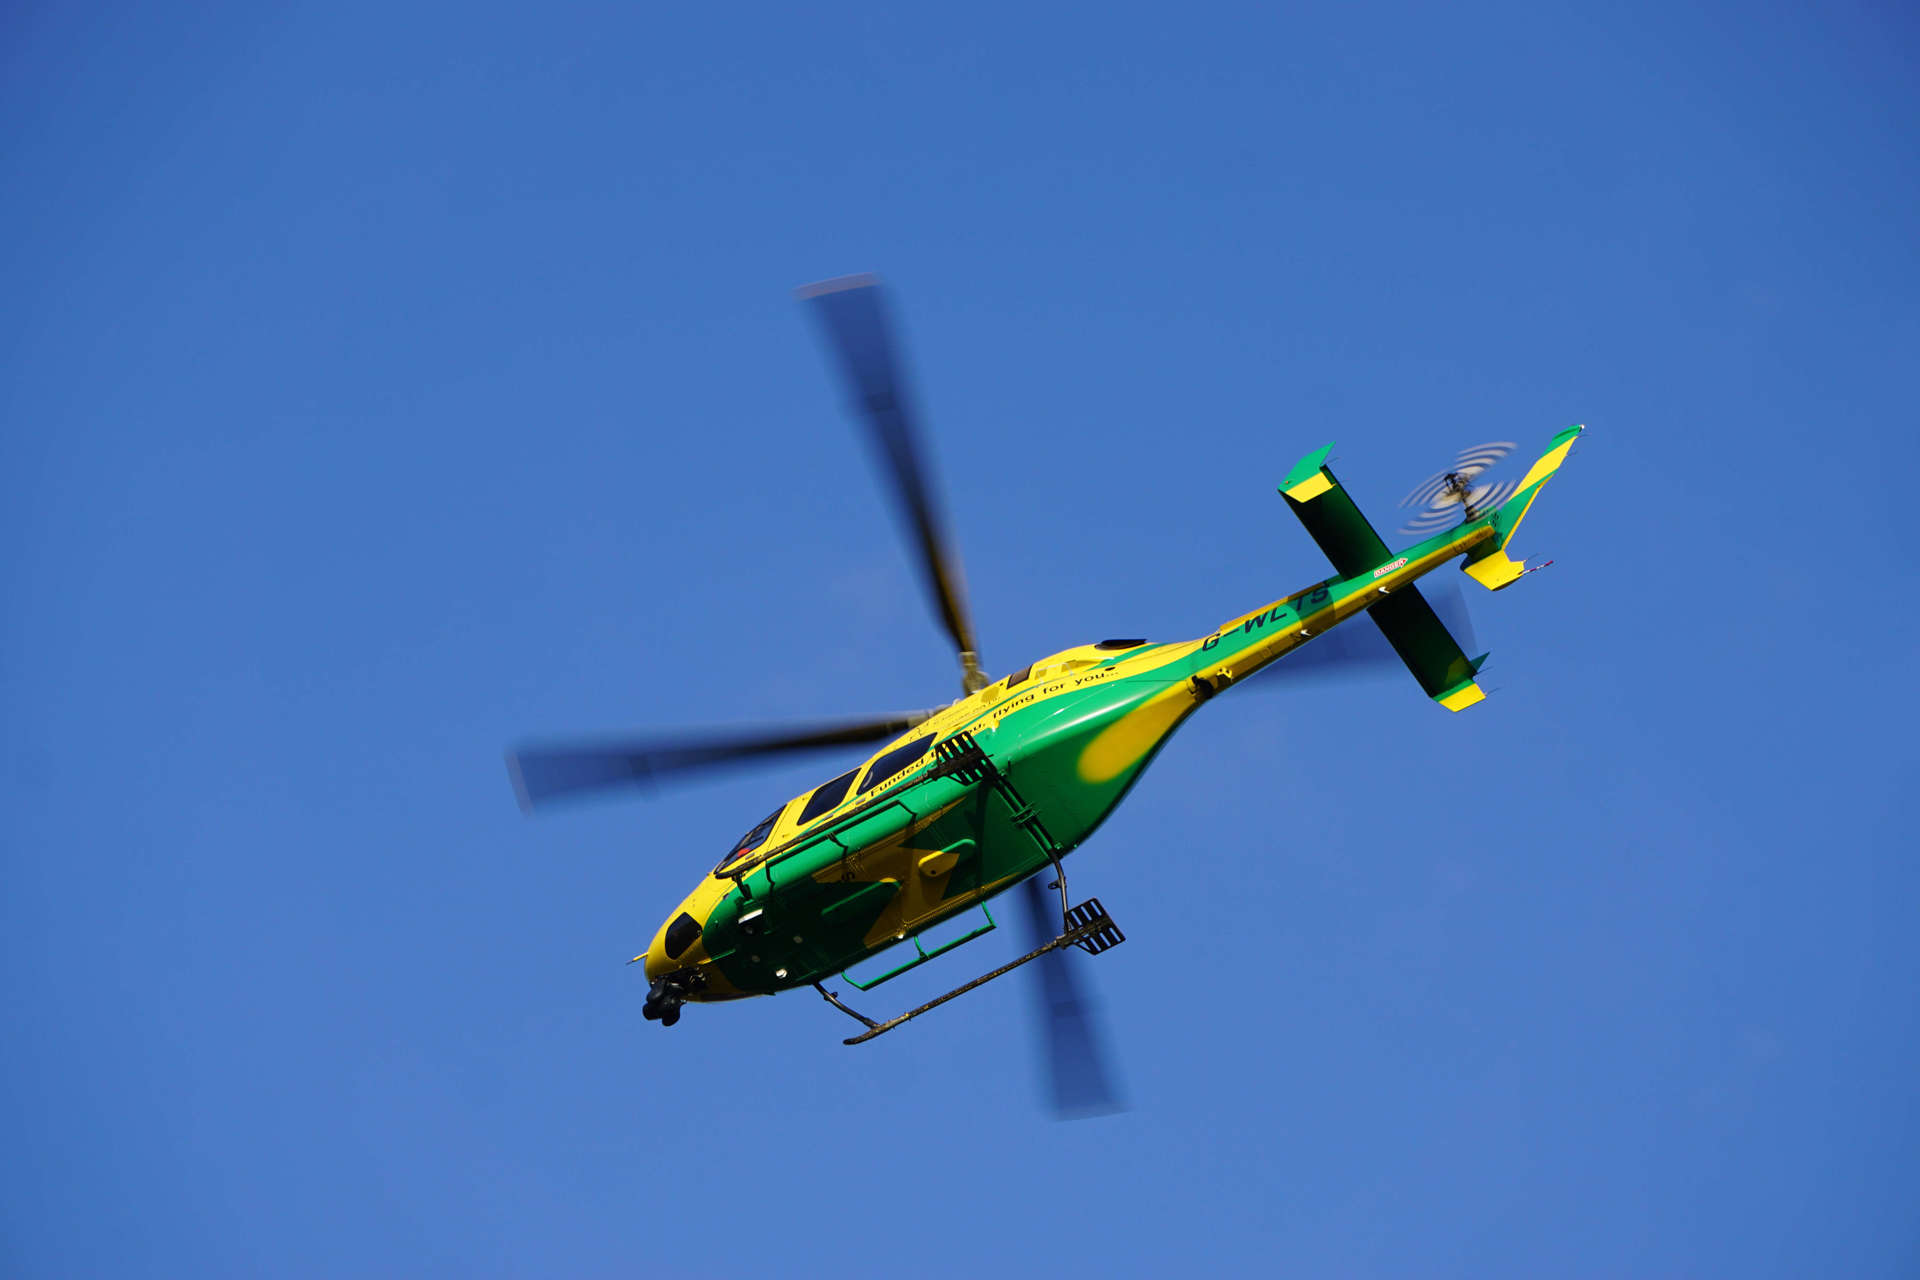 The yellow and green helicopter in flight against a blue sky.